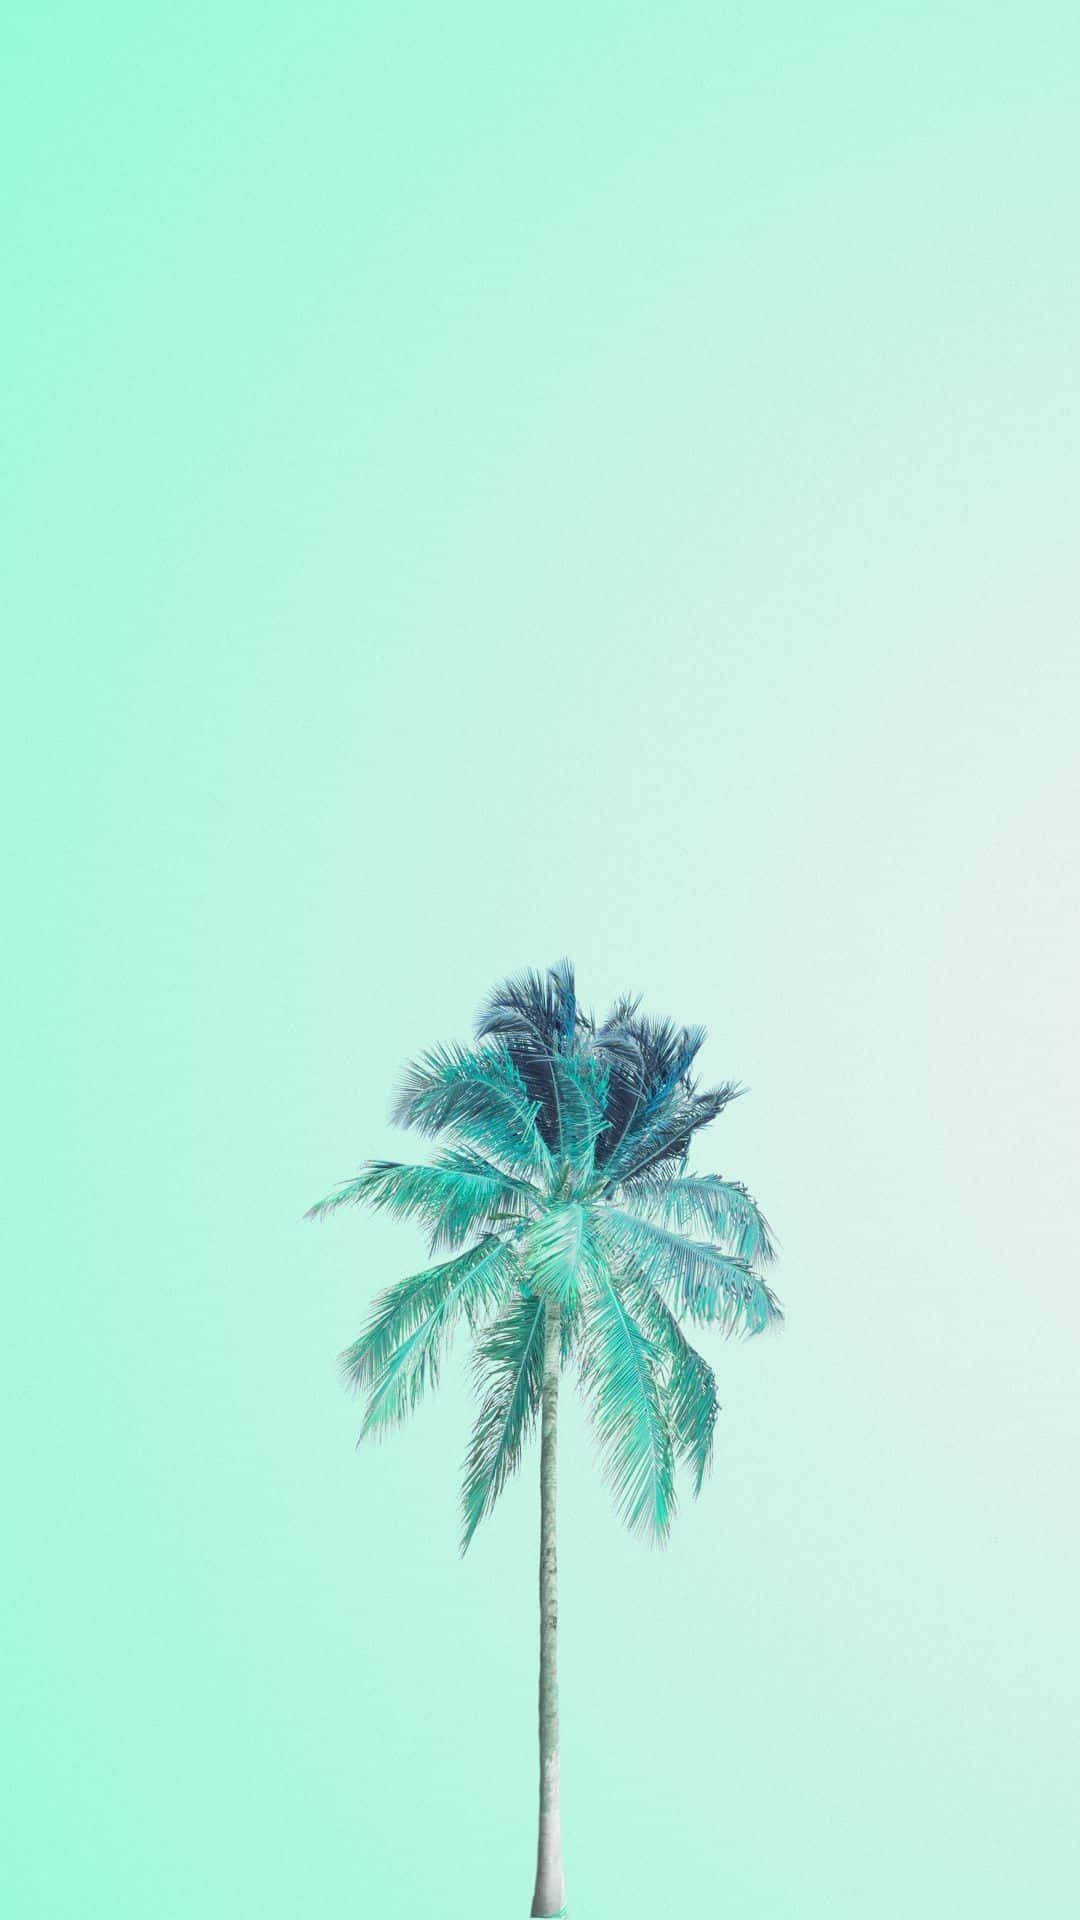 Enjoy the summer in pastel-colored vibrancy Wallpaper